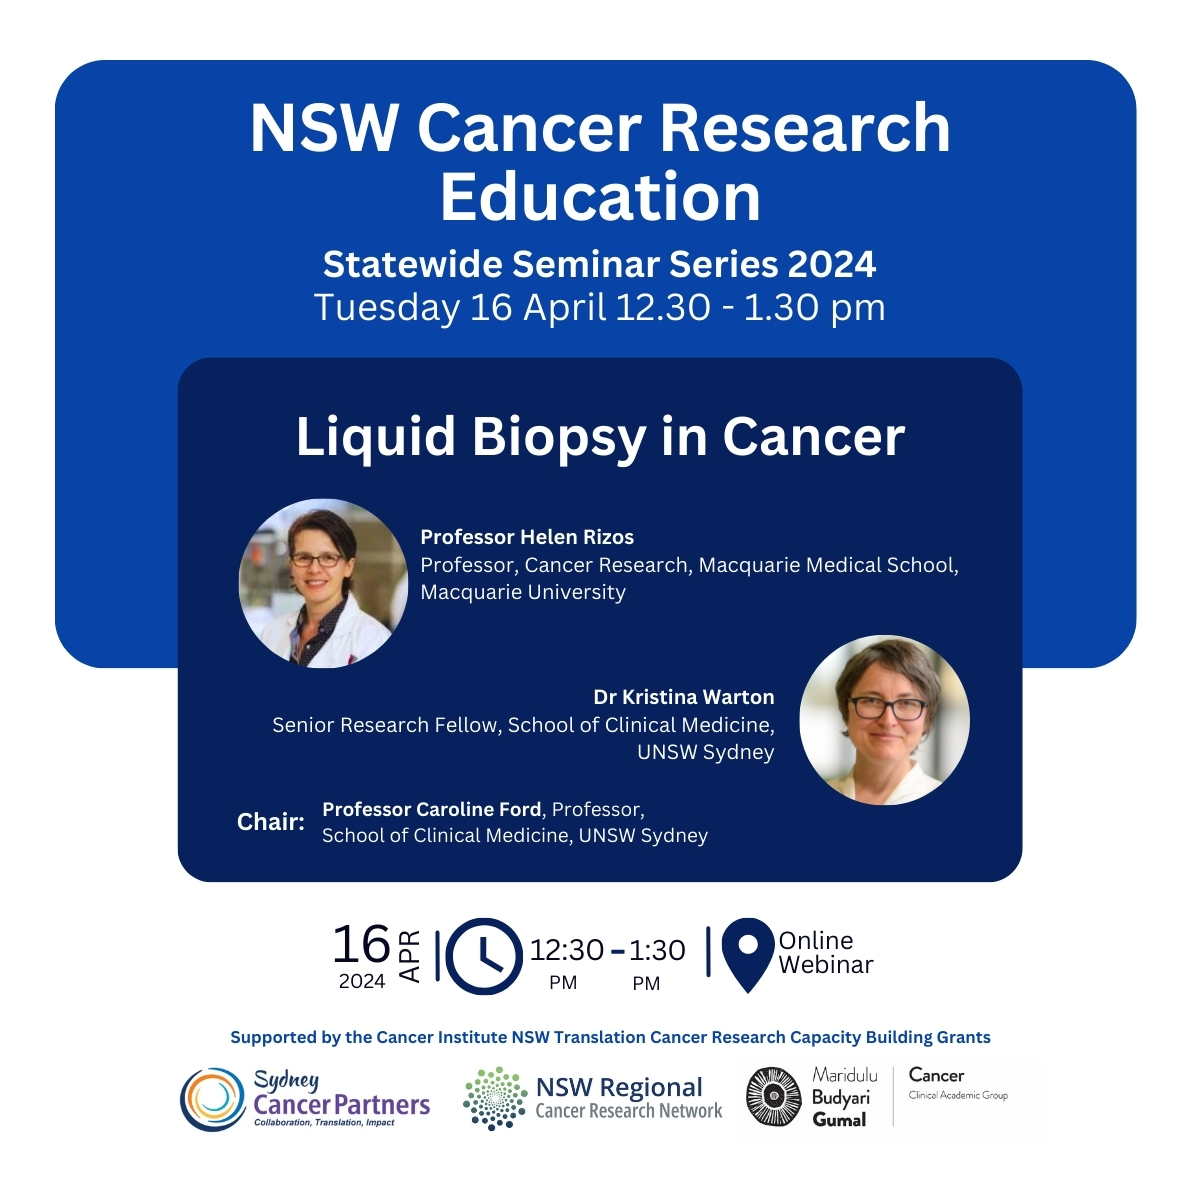 Join @NSWRCRN, @CancerSPHERE & @SydCancerPtnrs for next weeks NSW Cancer Research Ed online seminar - 'Liquid Biopsy in Cancer' - featuring Prof @HelenRizos & Dr Kristina Warton 🗓️Tues, April 16, 12:30-1:30 PM ✏️Register now @ bit.ly/3J847WM Chair: Prof Caroline Ford